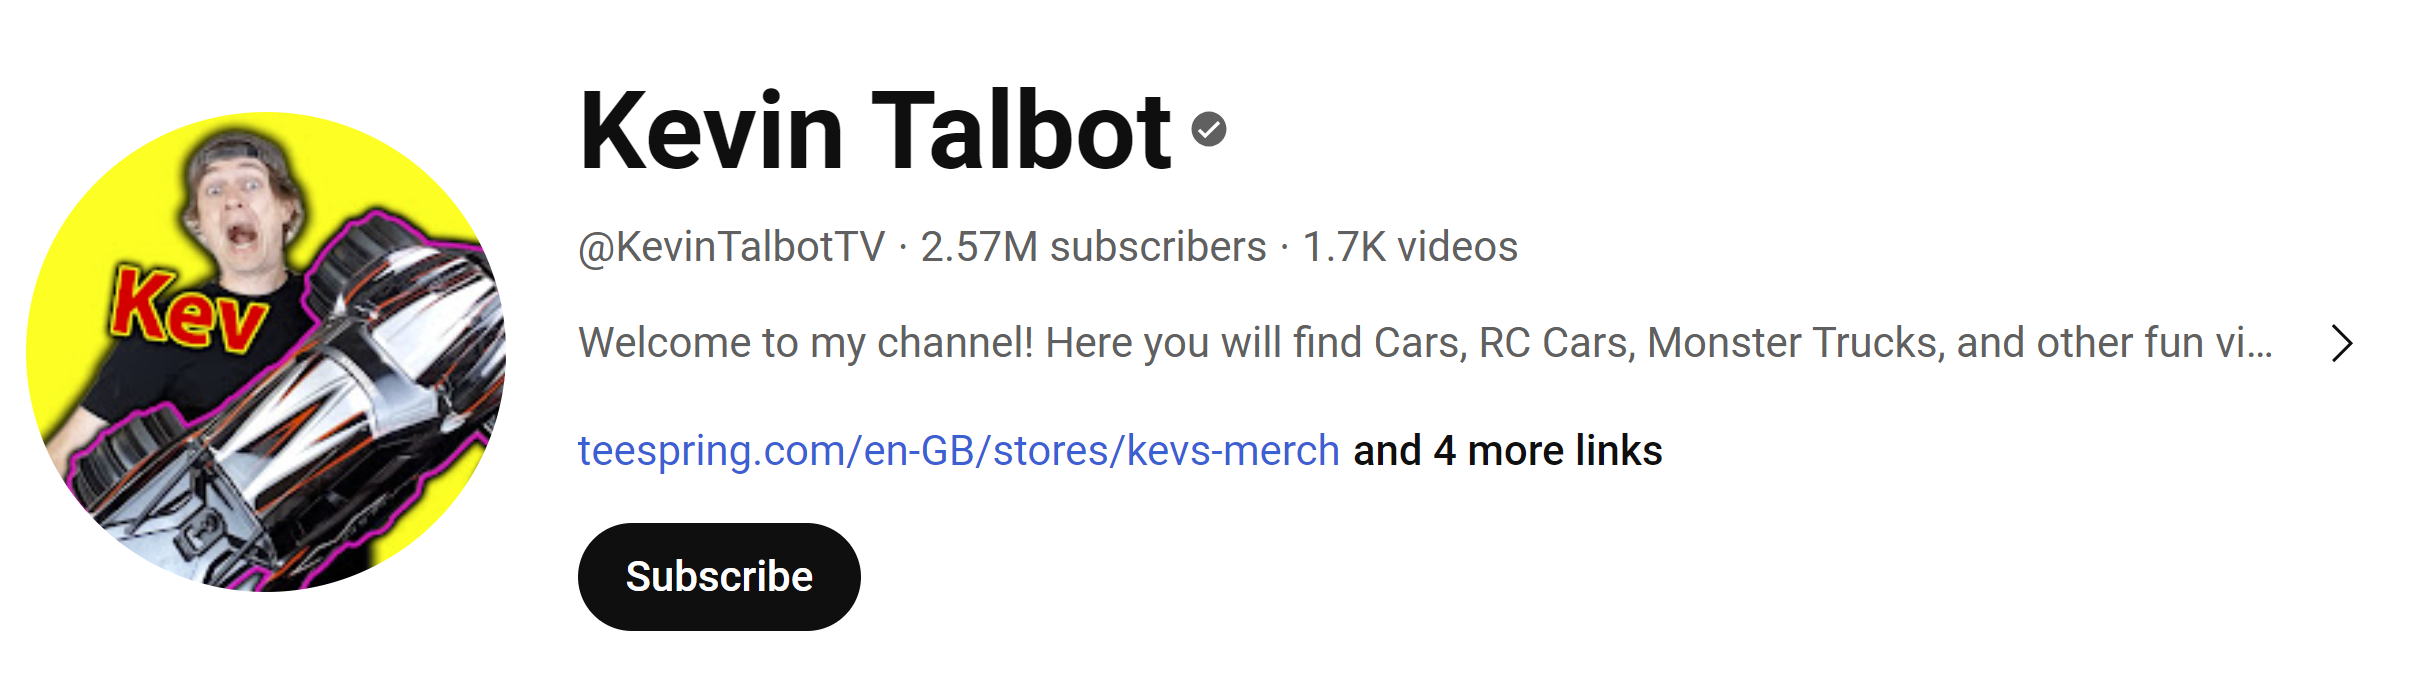 Who Is Kevin Talbot